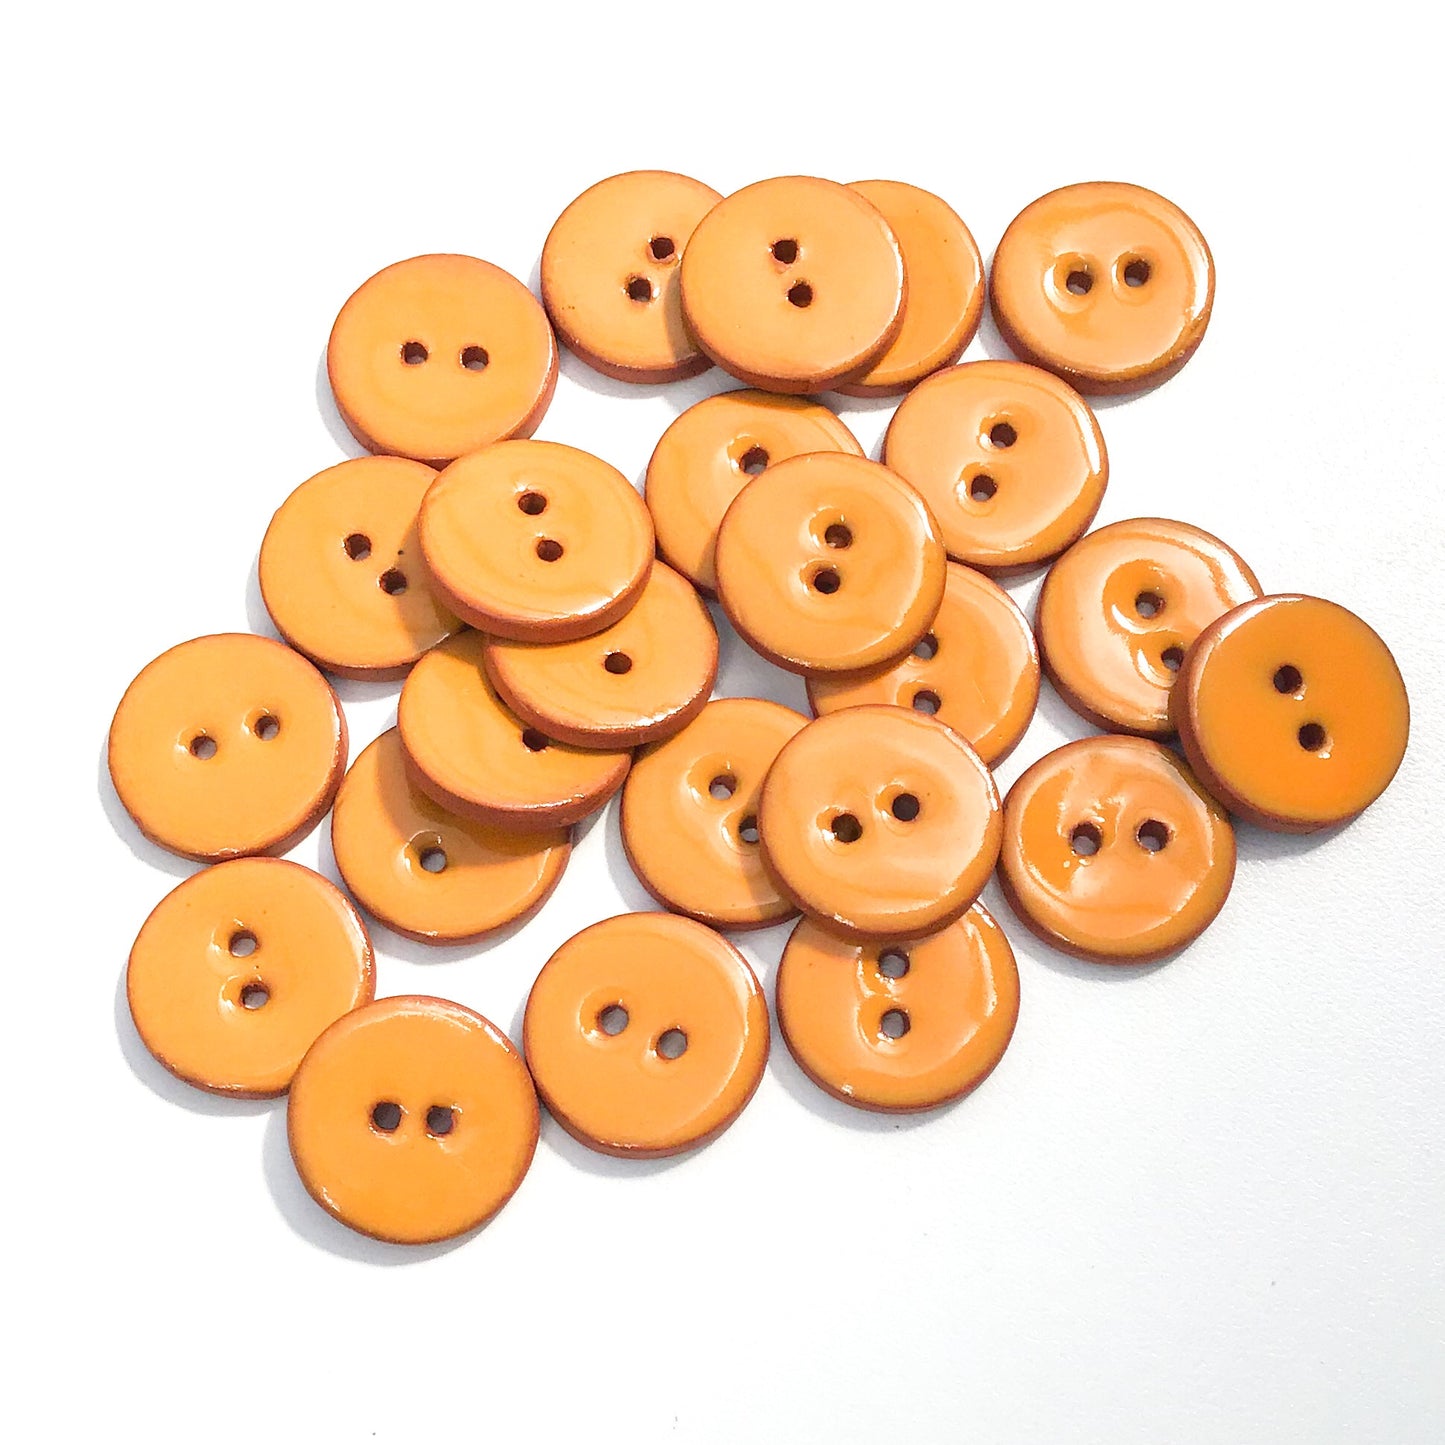 Orange Ceramic Buttons - Clay Buttons - 3/4" (ws-139)